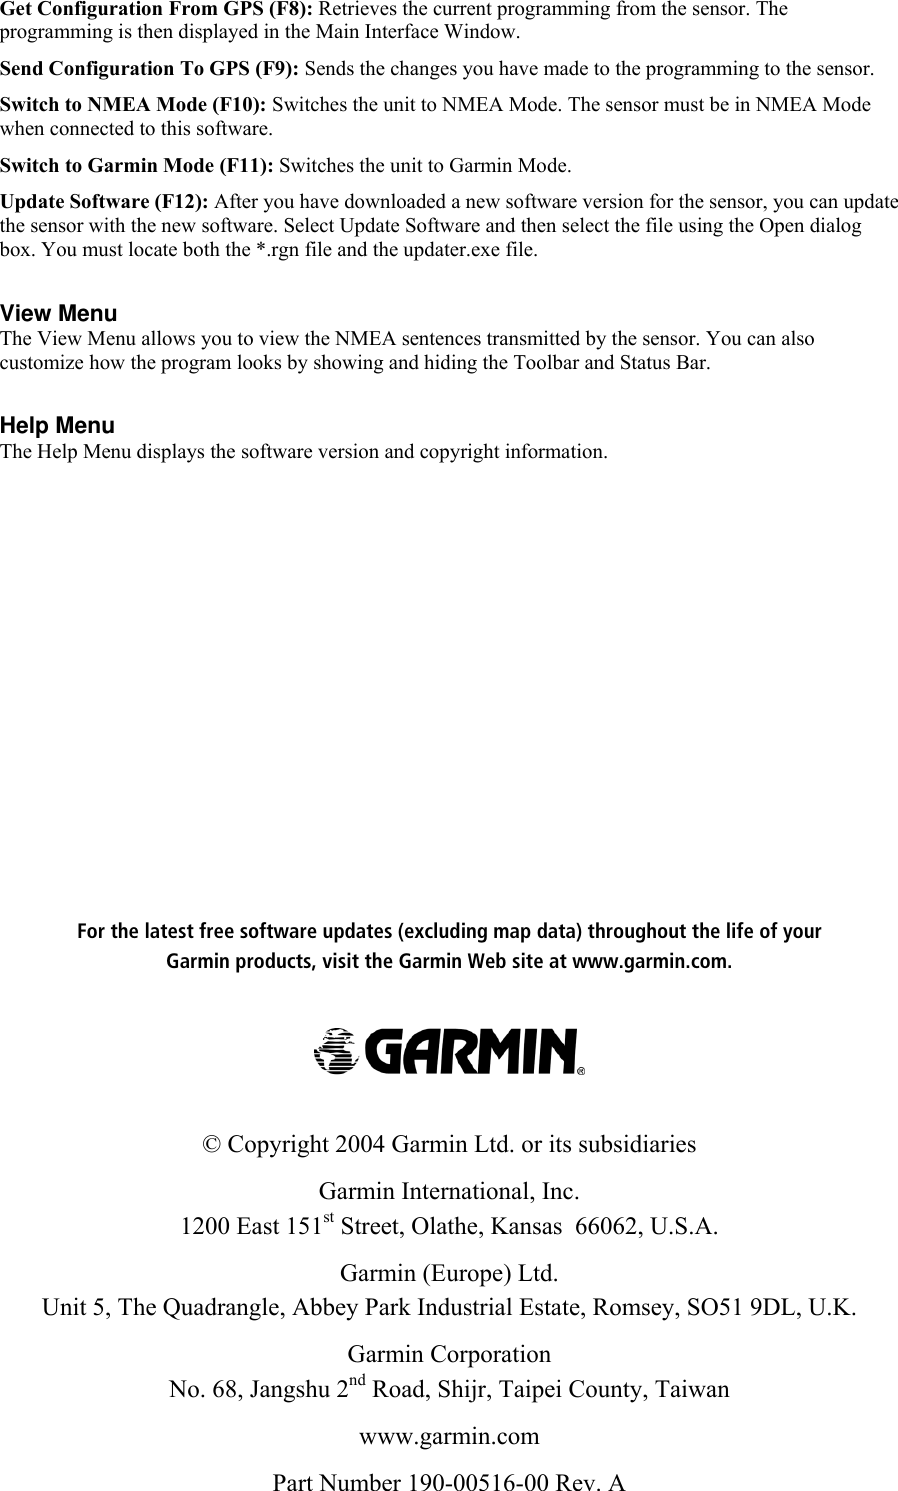 For the latest free software updates (excluding map data) throughout the life of yourGarmin products, visit the Garmin Web site at www.garmin.com.© Copyright 2004 Garmin Ltd. or its subsidiariesGarmin International, Inc.1200 East 151st Street, Olathe, Kansas  66062, U.S.A.Garmin (Europe) Ltd.Unit 5, The Quadrangle, Abbey Park Industrial Estate, Romsey, SO51 9DL, U.K.Garmin CorporationNo. 68, Jangshu 2nd Road, Shijr, Taipei County, Taiwanwww.garmin.comPart Number 190-00516-00 Rev. AGet Configuration From GPS (F8): Retrieves the current programming from the sensor. Theprogramming is then displayed in the Main Interface Window.  Send Configuration To GPS (F9): Sends the changes you have made to the programming to the sensor.  Switch to NMEA Mode (F10): Switches the unit to NMEA Mode. The sensor must be in NMEA Modewhen connected to this software.  Switch to Garmin Mode (F11): Switches the unit to Garmin Mode. Update Software (F12): After you have downloaded a new software version for the sensor, you can updatethe sensor with the new software. Select Update Software and then select the file using the Open dialogbox. You must locate both the *.rgn file and the updater.exe file.  View MenuThe View Menu allows you to view the NMEA sentences transmitted by the sensor. You can alsocustomize how the program looks by showing and hiding the Toolbar and Status Bar.  Help MenuThe Help Menu displays the software version and copyright information.   